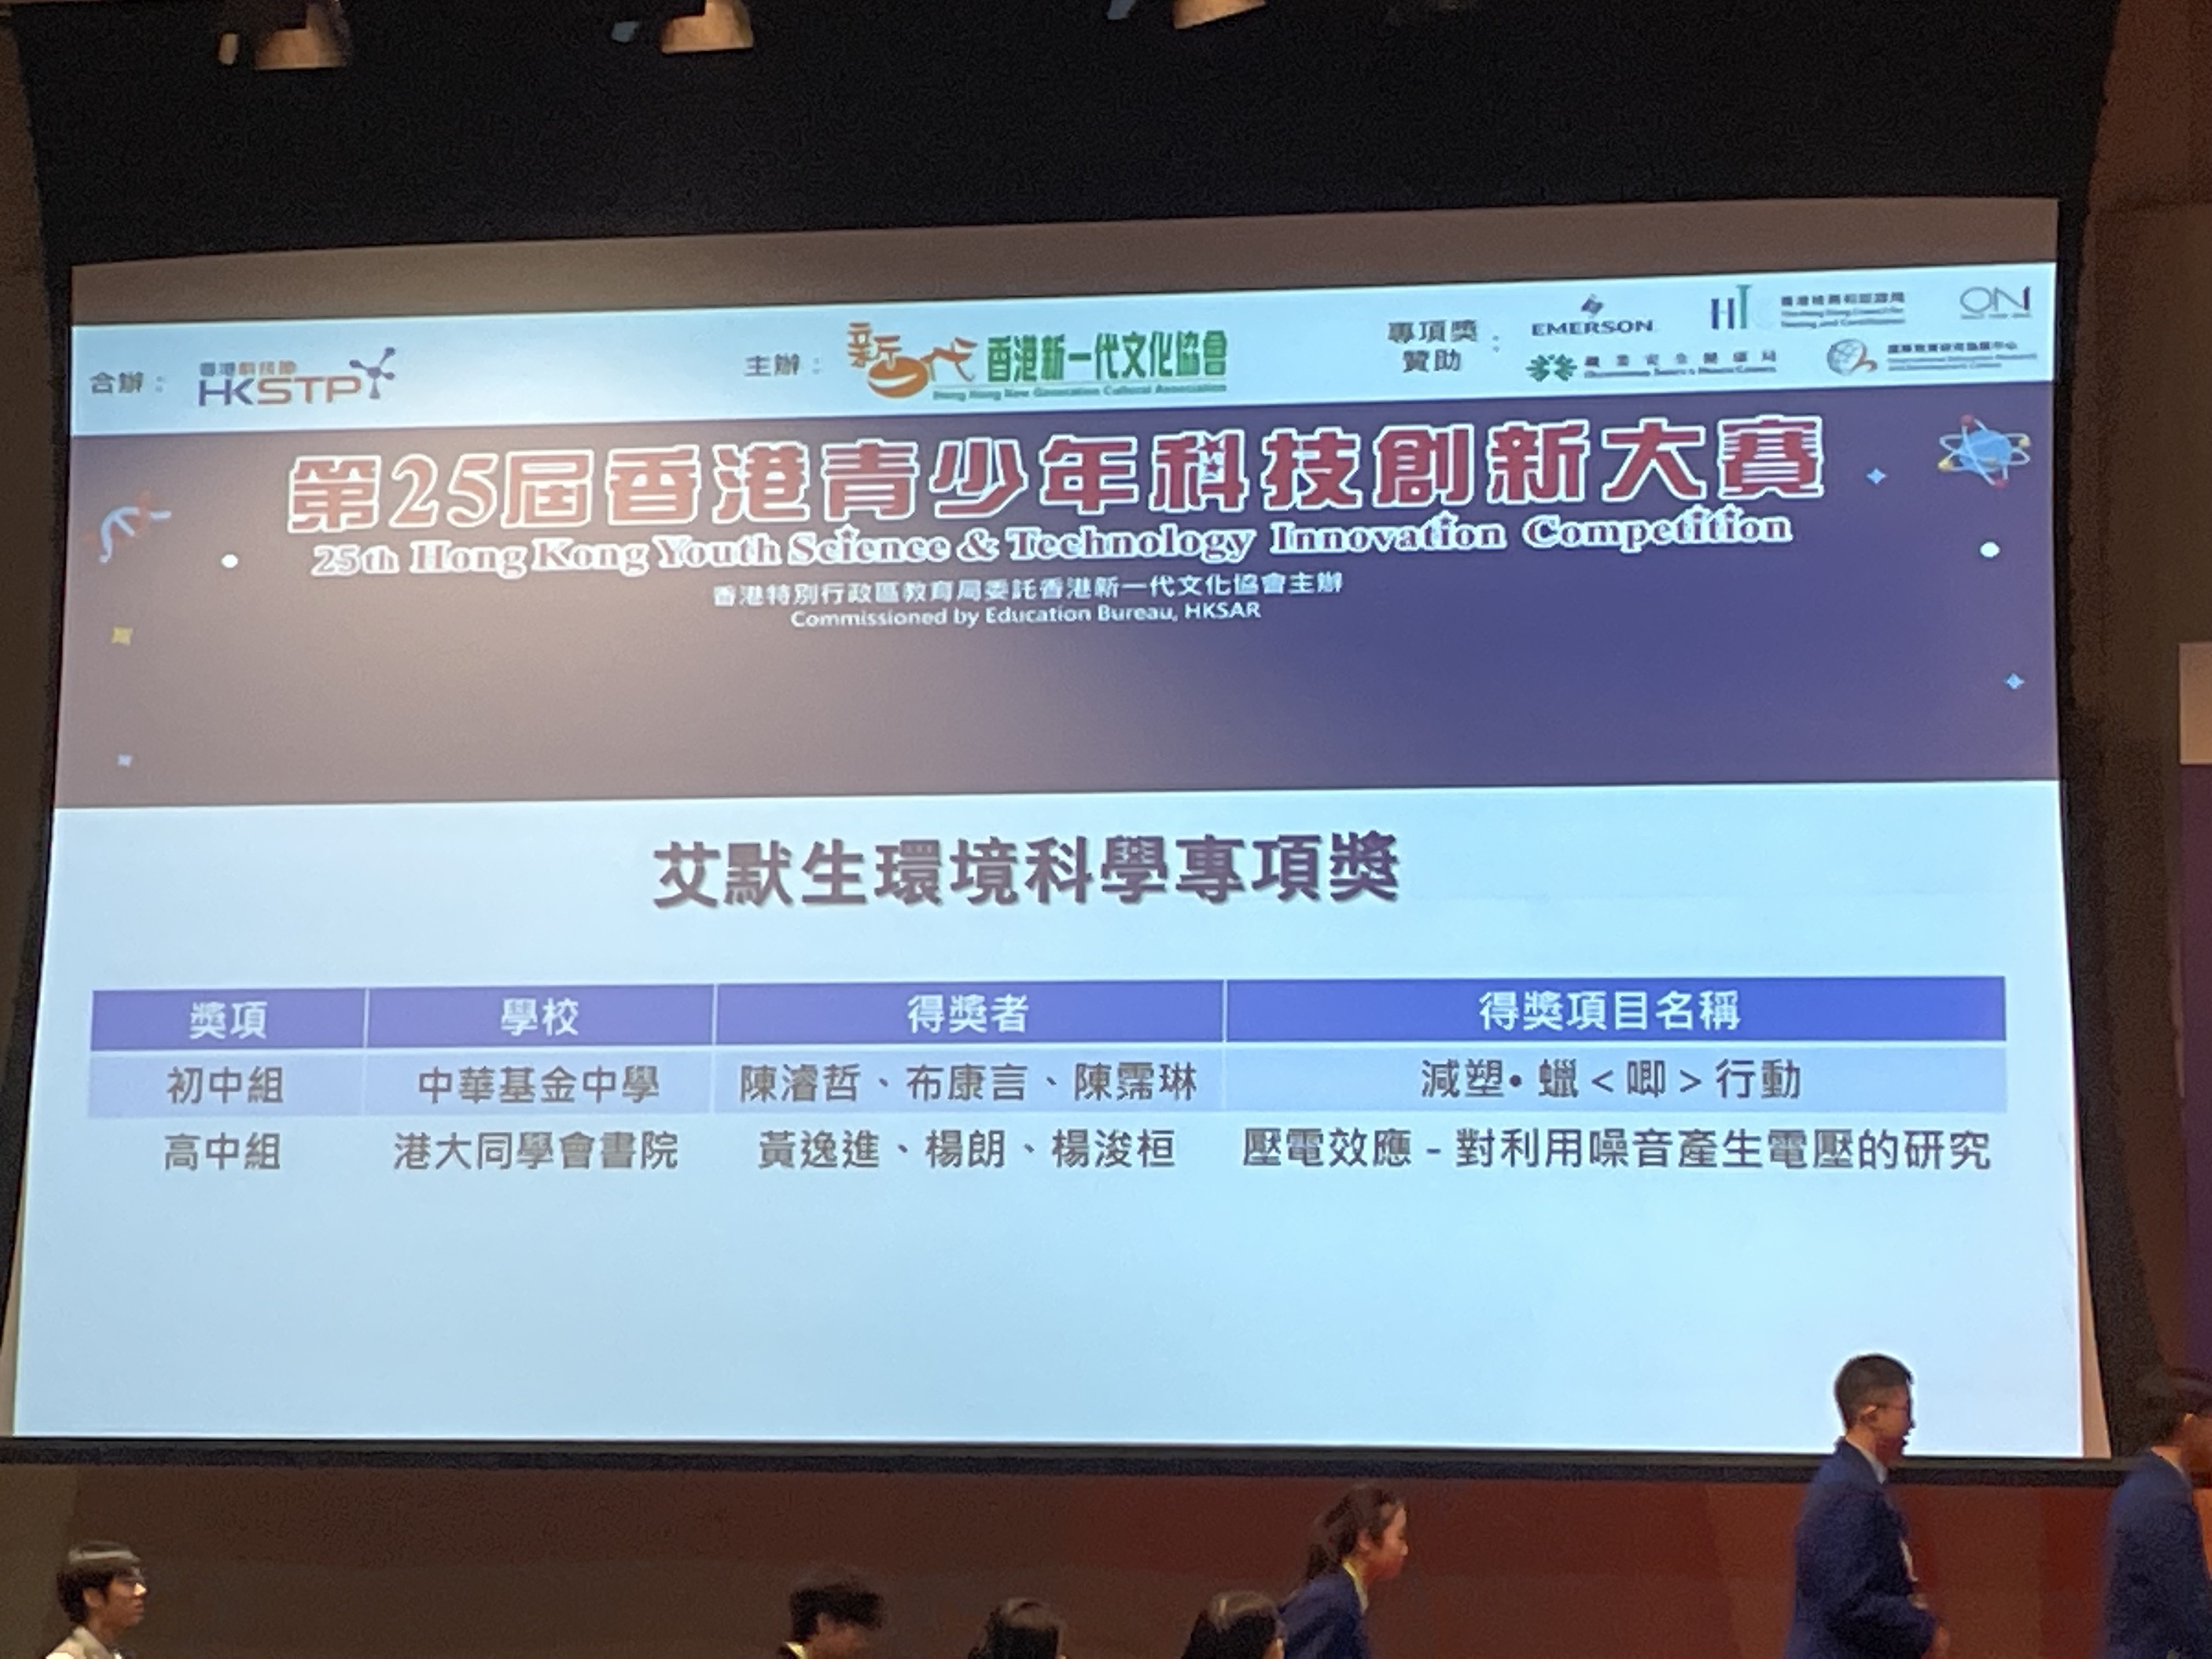 Hong Kong Youth Science & Technology Innovation Competition (HKYSTIC)